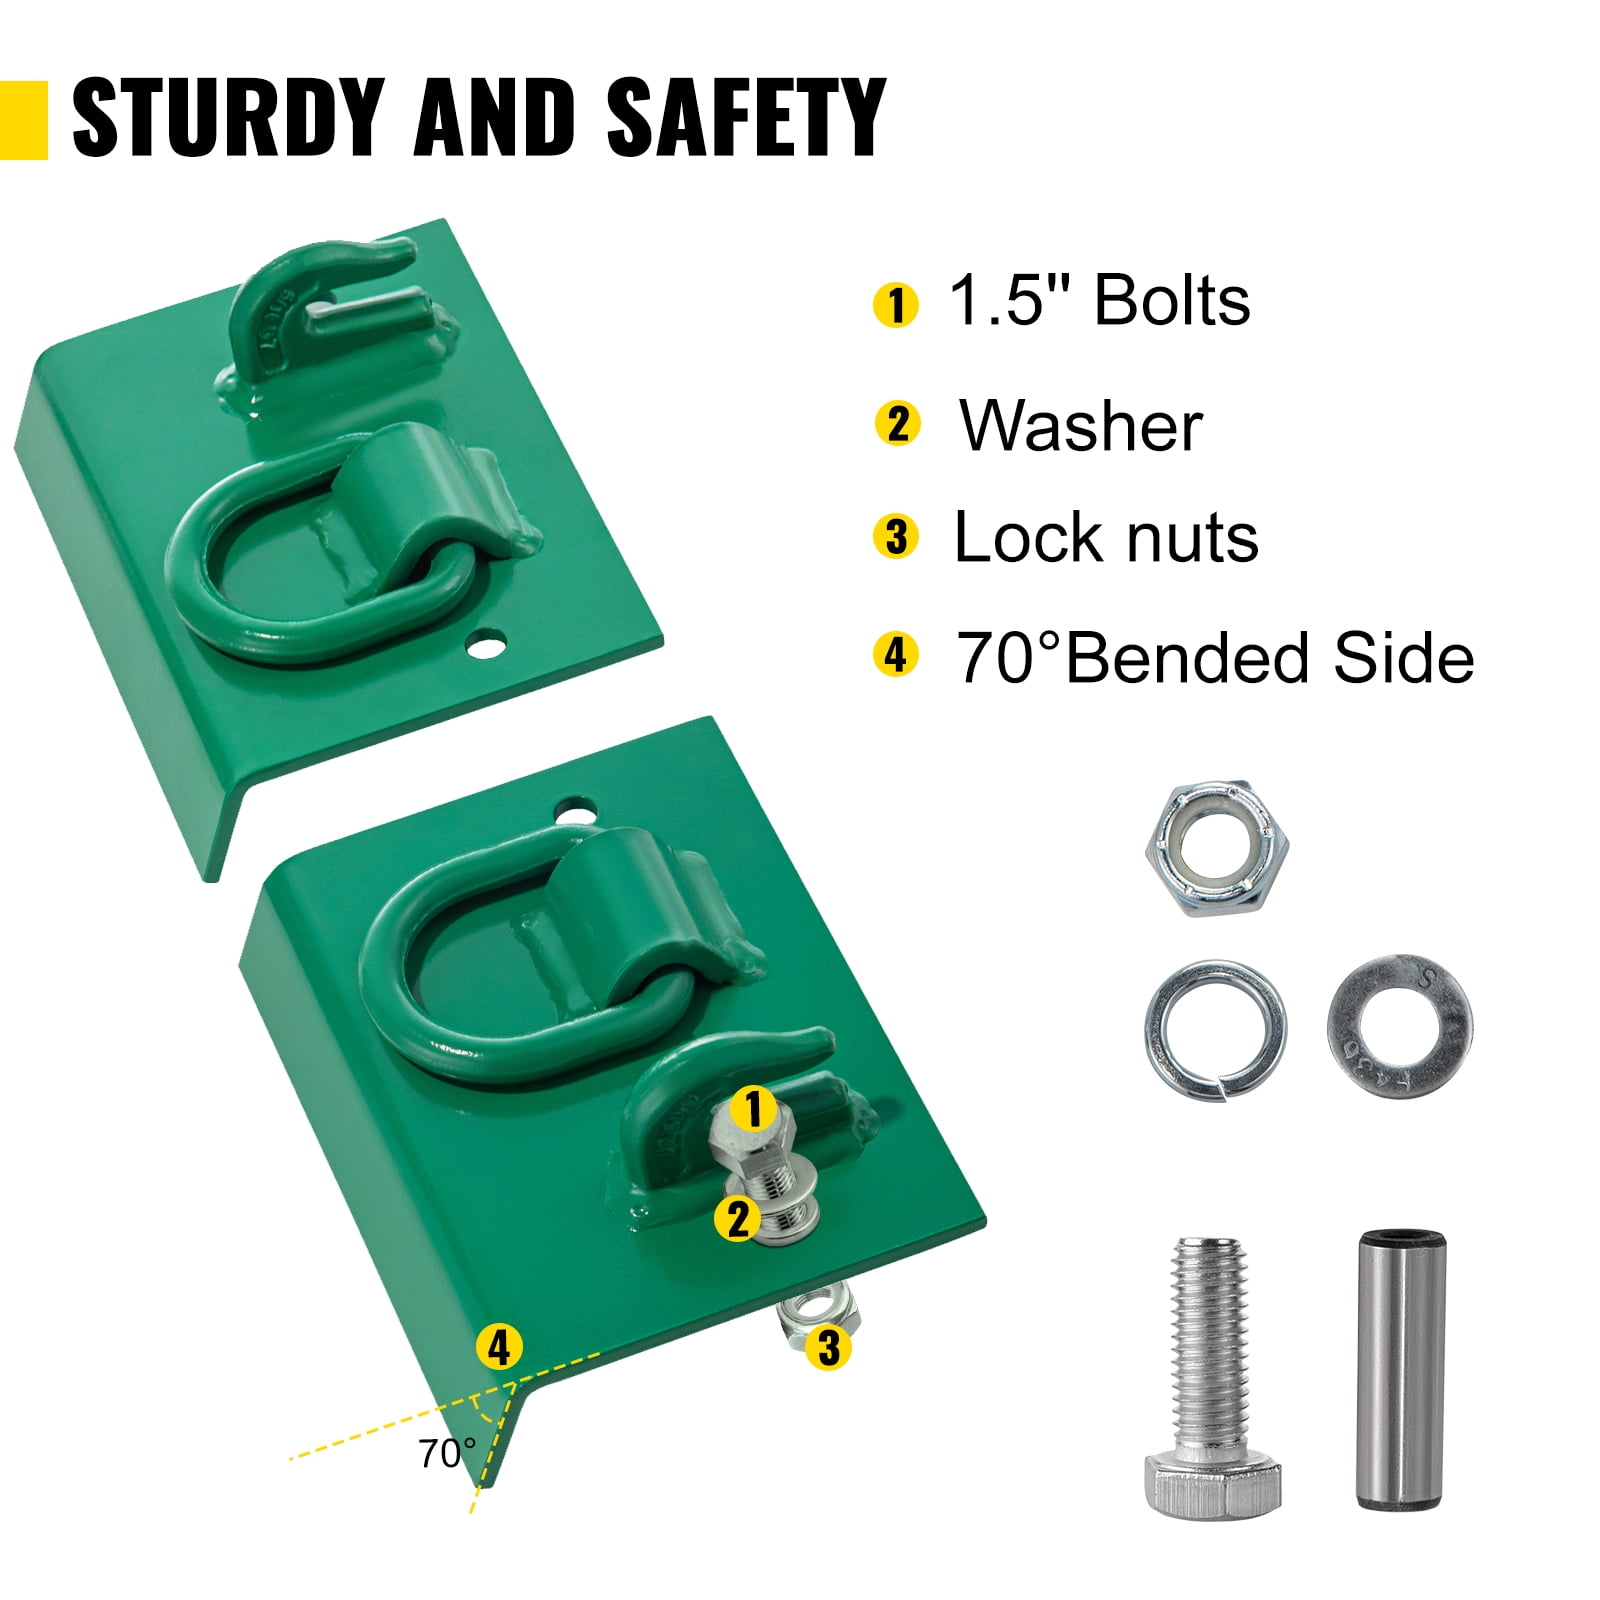 RV UTV VEVOR Tractor Bolt on Hooks Truck Hardware Included 4700LBS G70 Forged Bolt on Hooks for Tractor Bucket with 1/2 Shackles 1/4 Bolt on Grab Hooks Work Well for Tractor Bucket